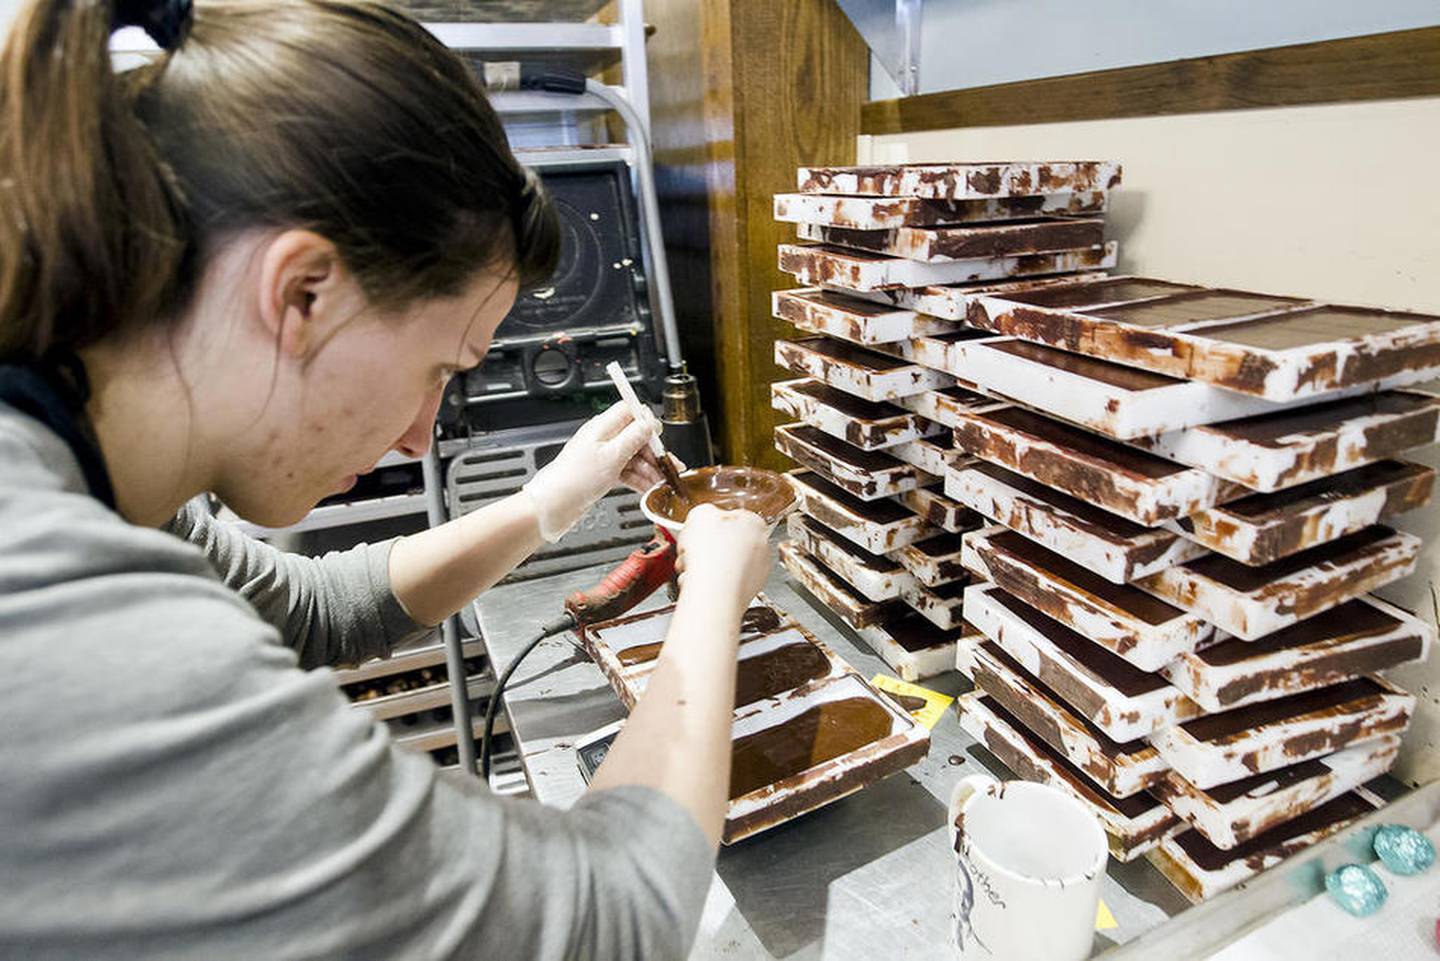 Chocolatier Hannah Marsili adds chocolate to molds while making chocolate bars at Ethereal Confections in Woodstock.